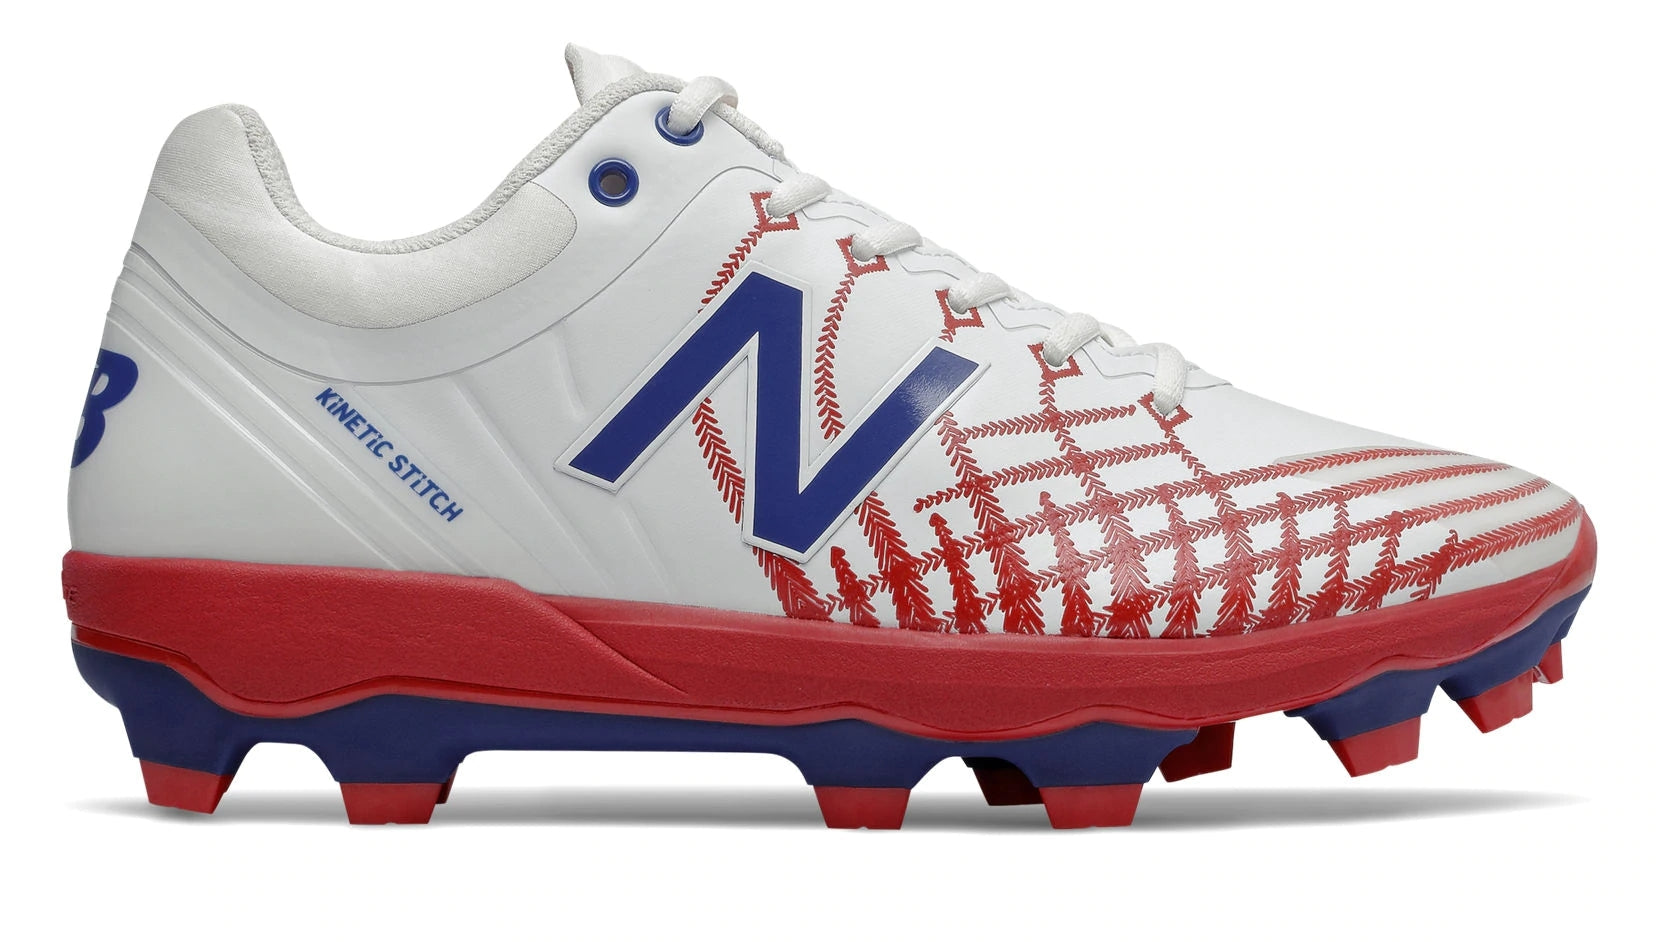 New Balance 4040v5 Adult Molded Cleats - Red/White/Blue (PL4040PR)